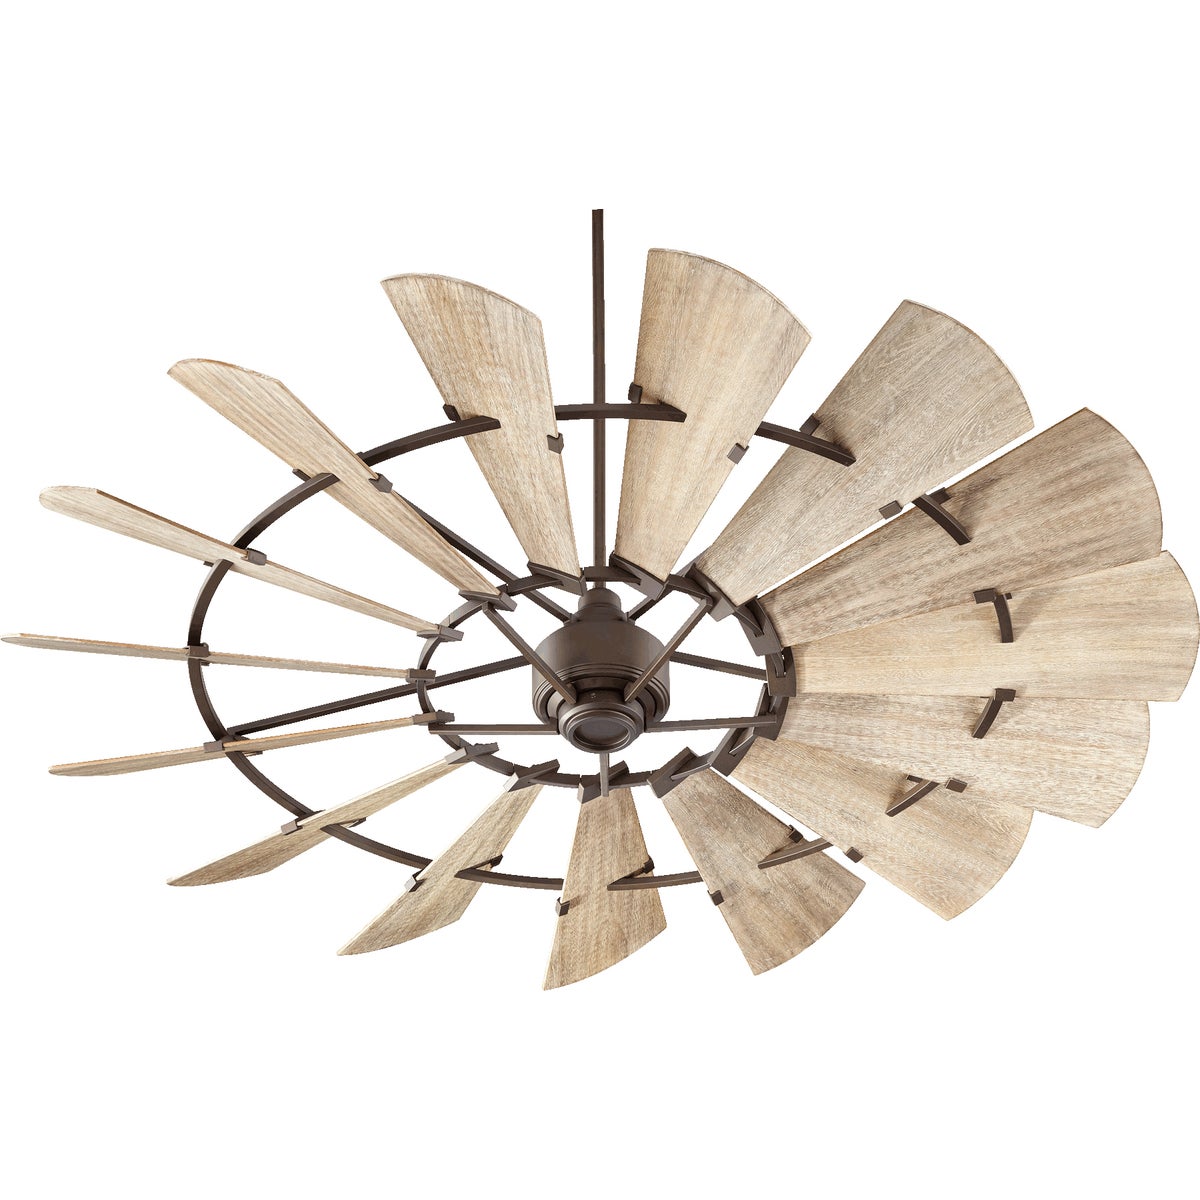 Alt text: "Farmhouse Ceiling Fan with 15 wooden blades in weathered oak finish, rustic design reminiscent of a windmill. Brand: Quorum International. Motor Size: DC-165L. Dimensions: 16.5"H x 72"W. UL Listed, Dry Location. Limited Lifetime Warranty."